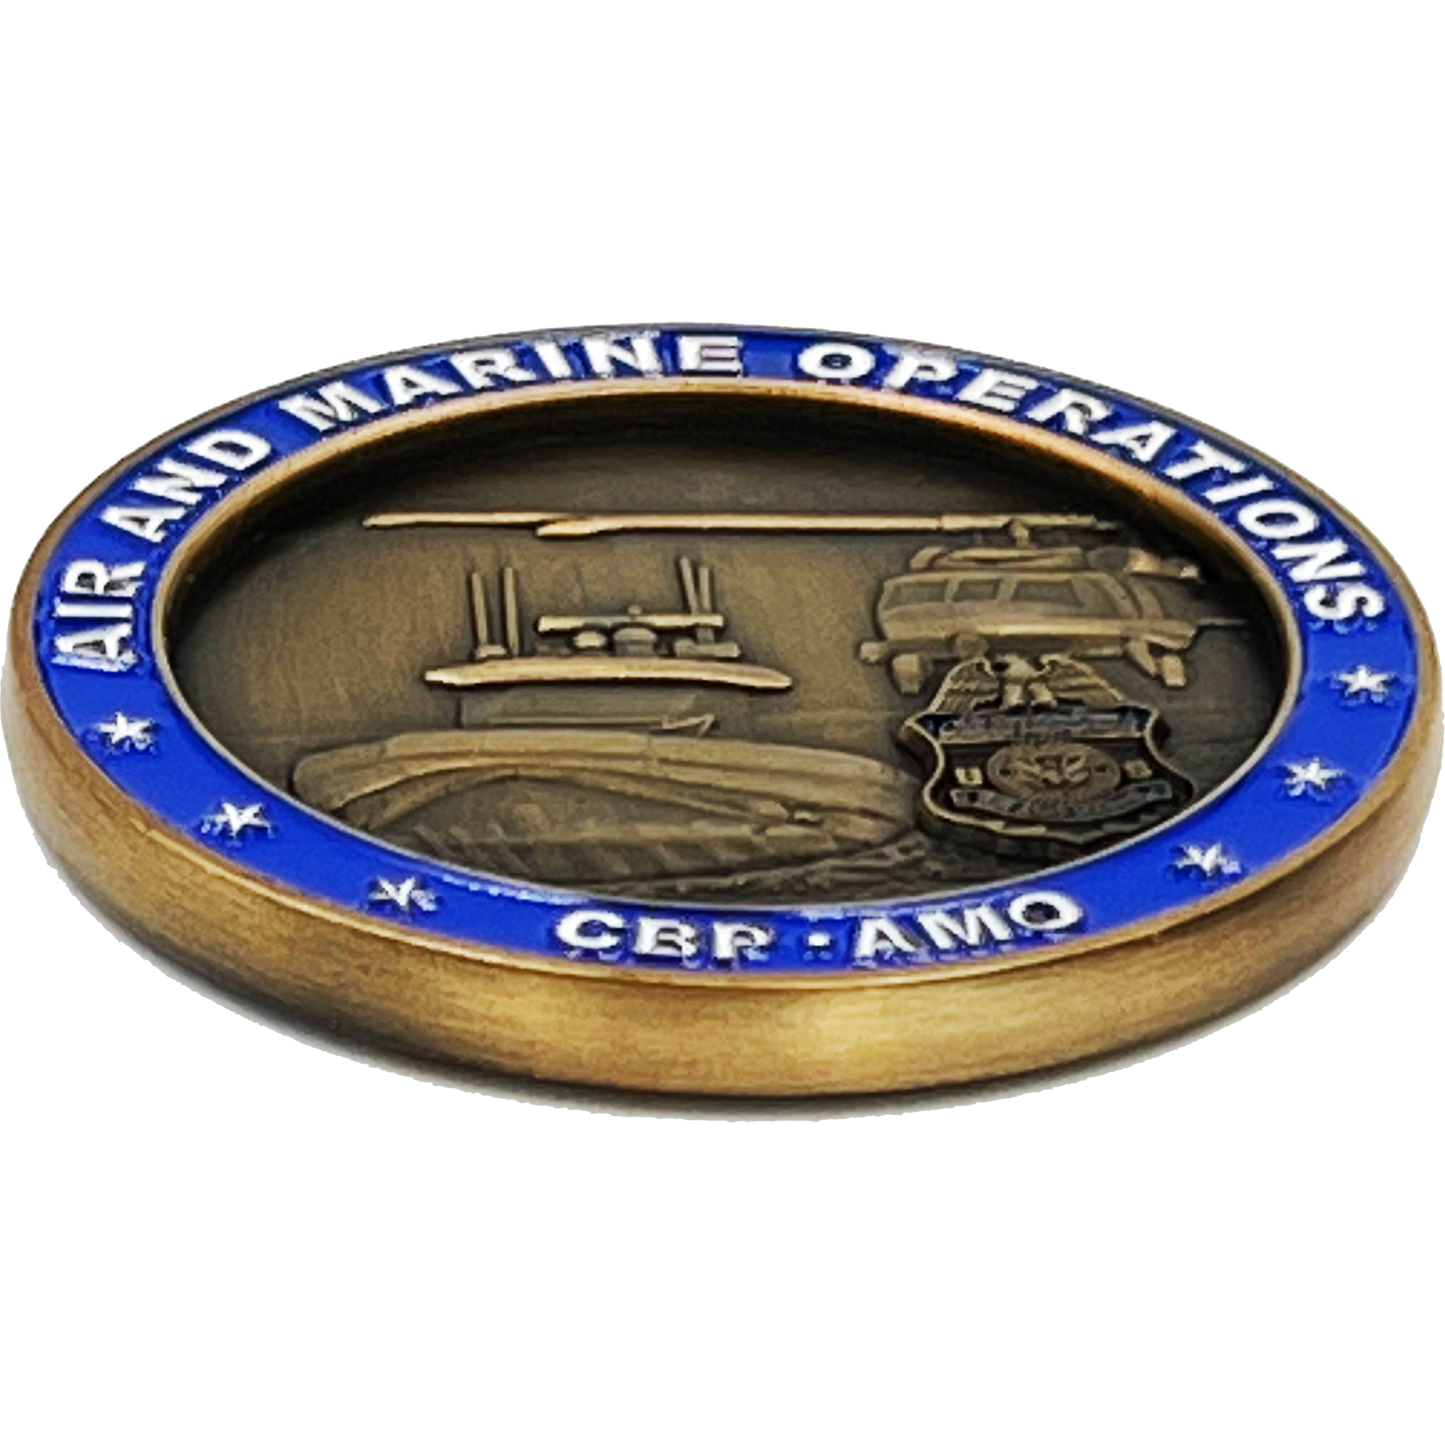 EL11-017 CBP Air and Marine Ops AMO Operations challenge coin Air Interdiction Agent Marine Agent